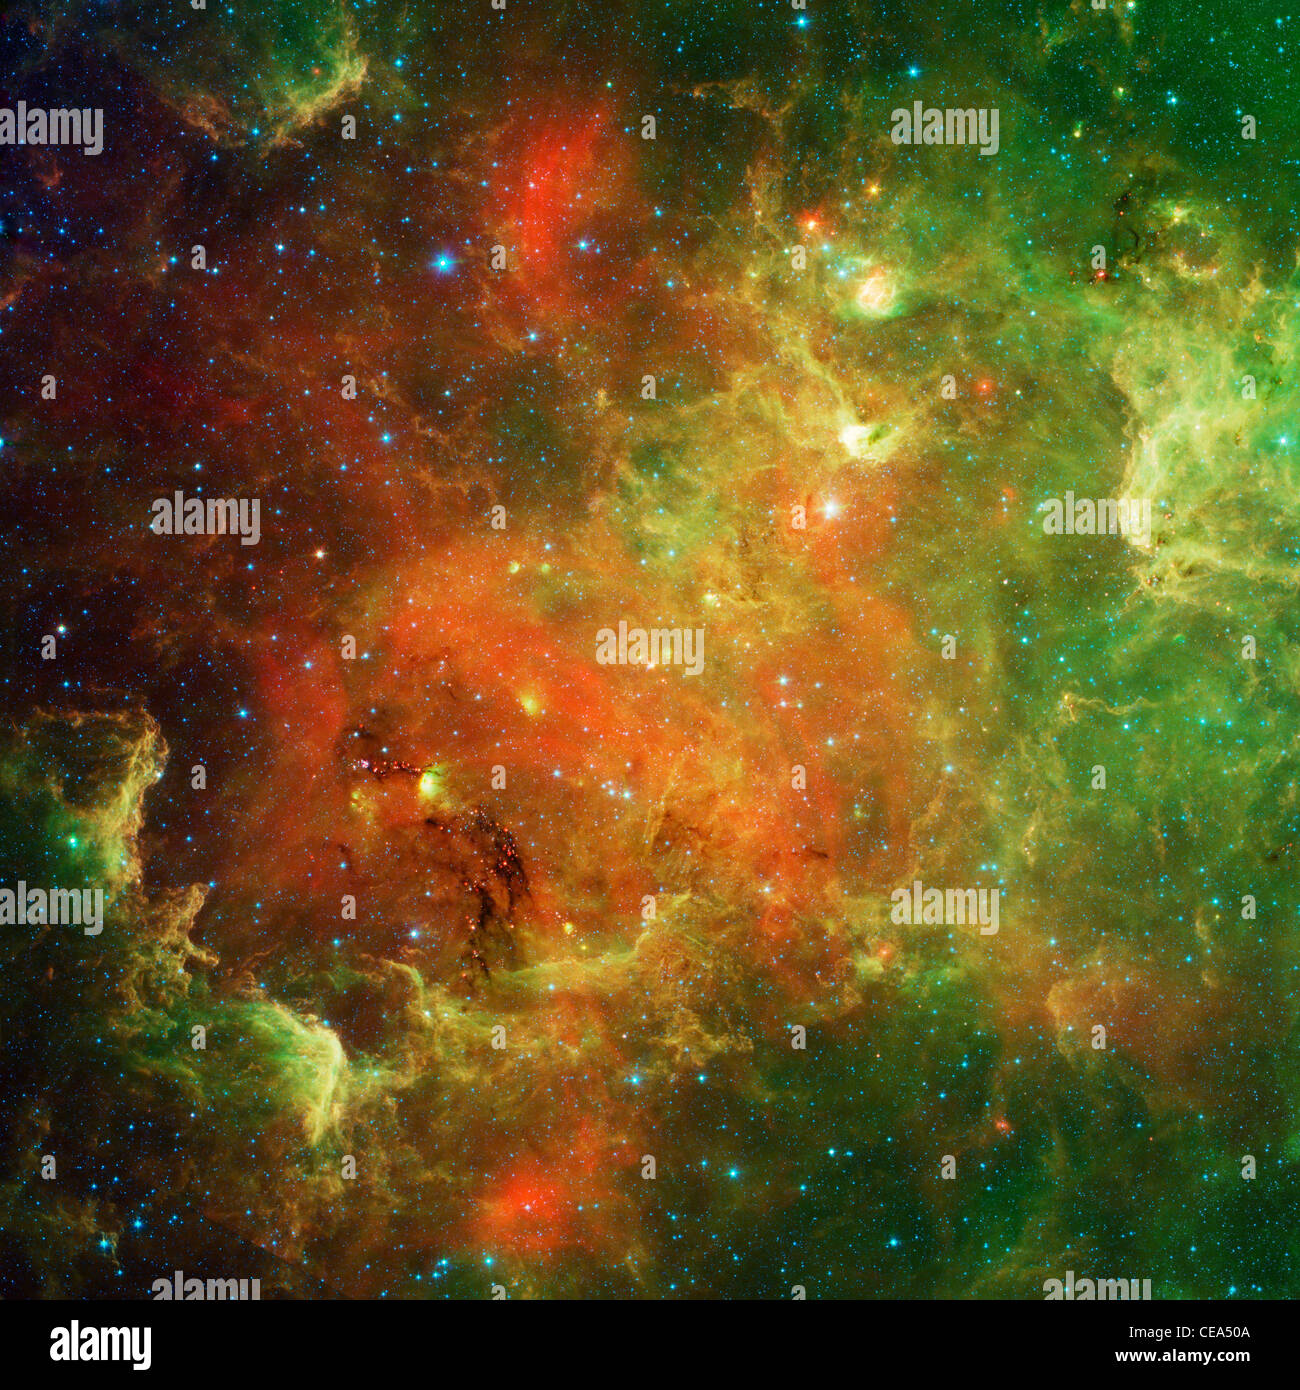 Swirling Landscape of Stars This swirling landscape of stars is known as the North America Nebula. In visible light, the region Stock Photo